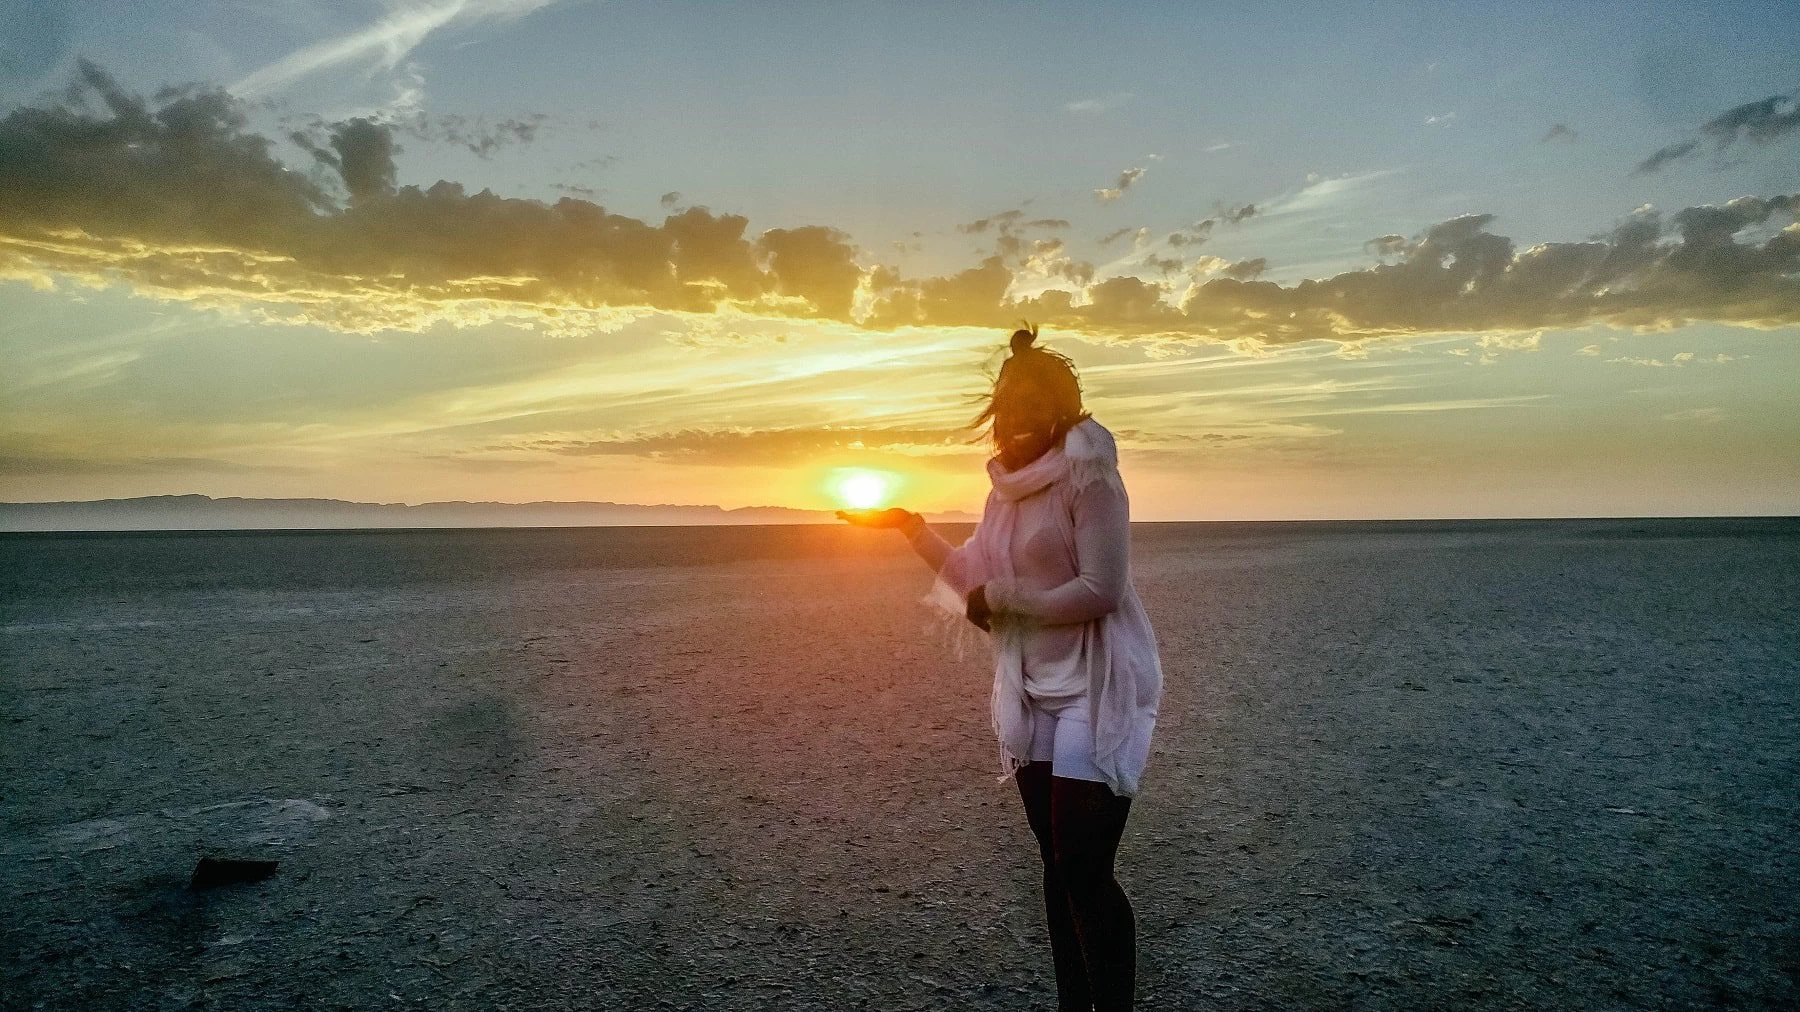 Waking up at 4 am to visit the salt flats and hold the rising sun in my hands